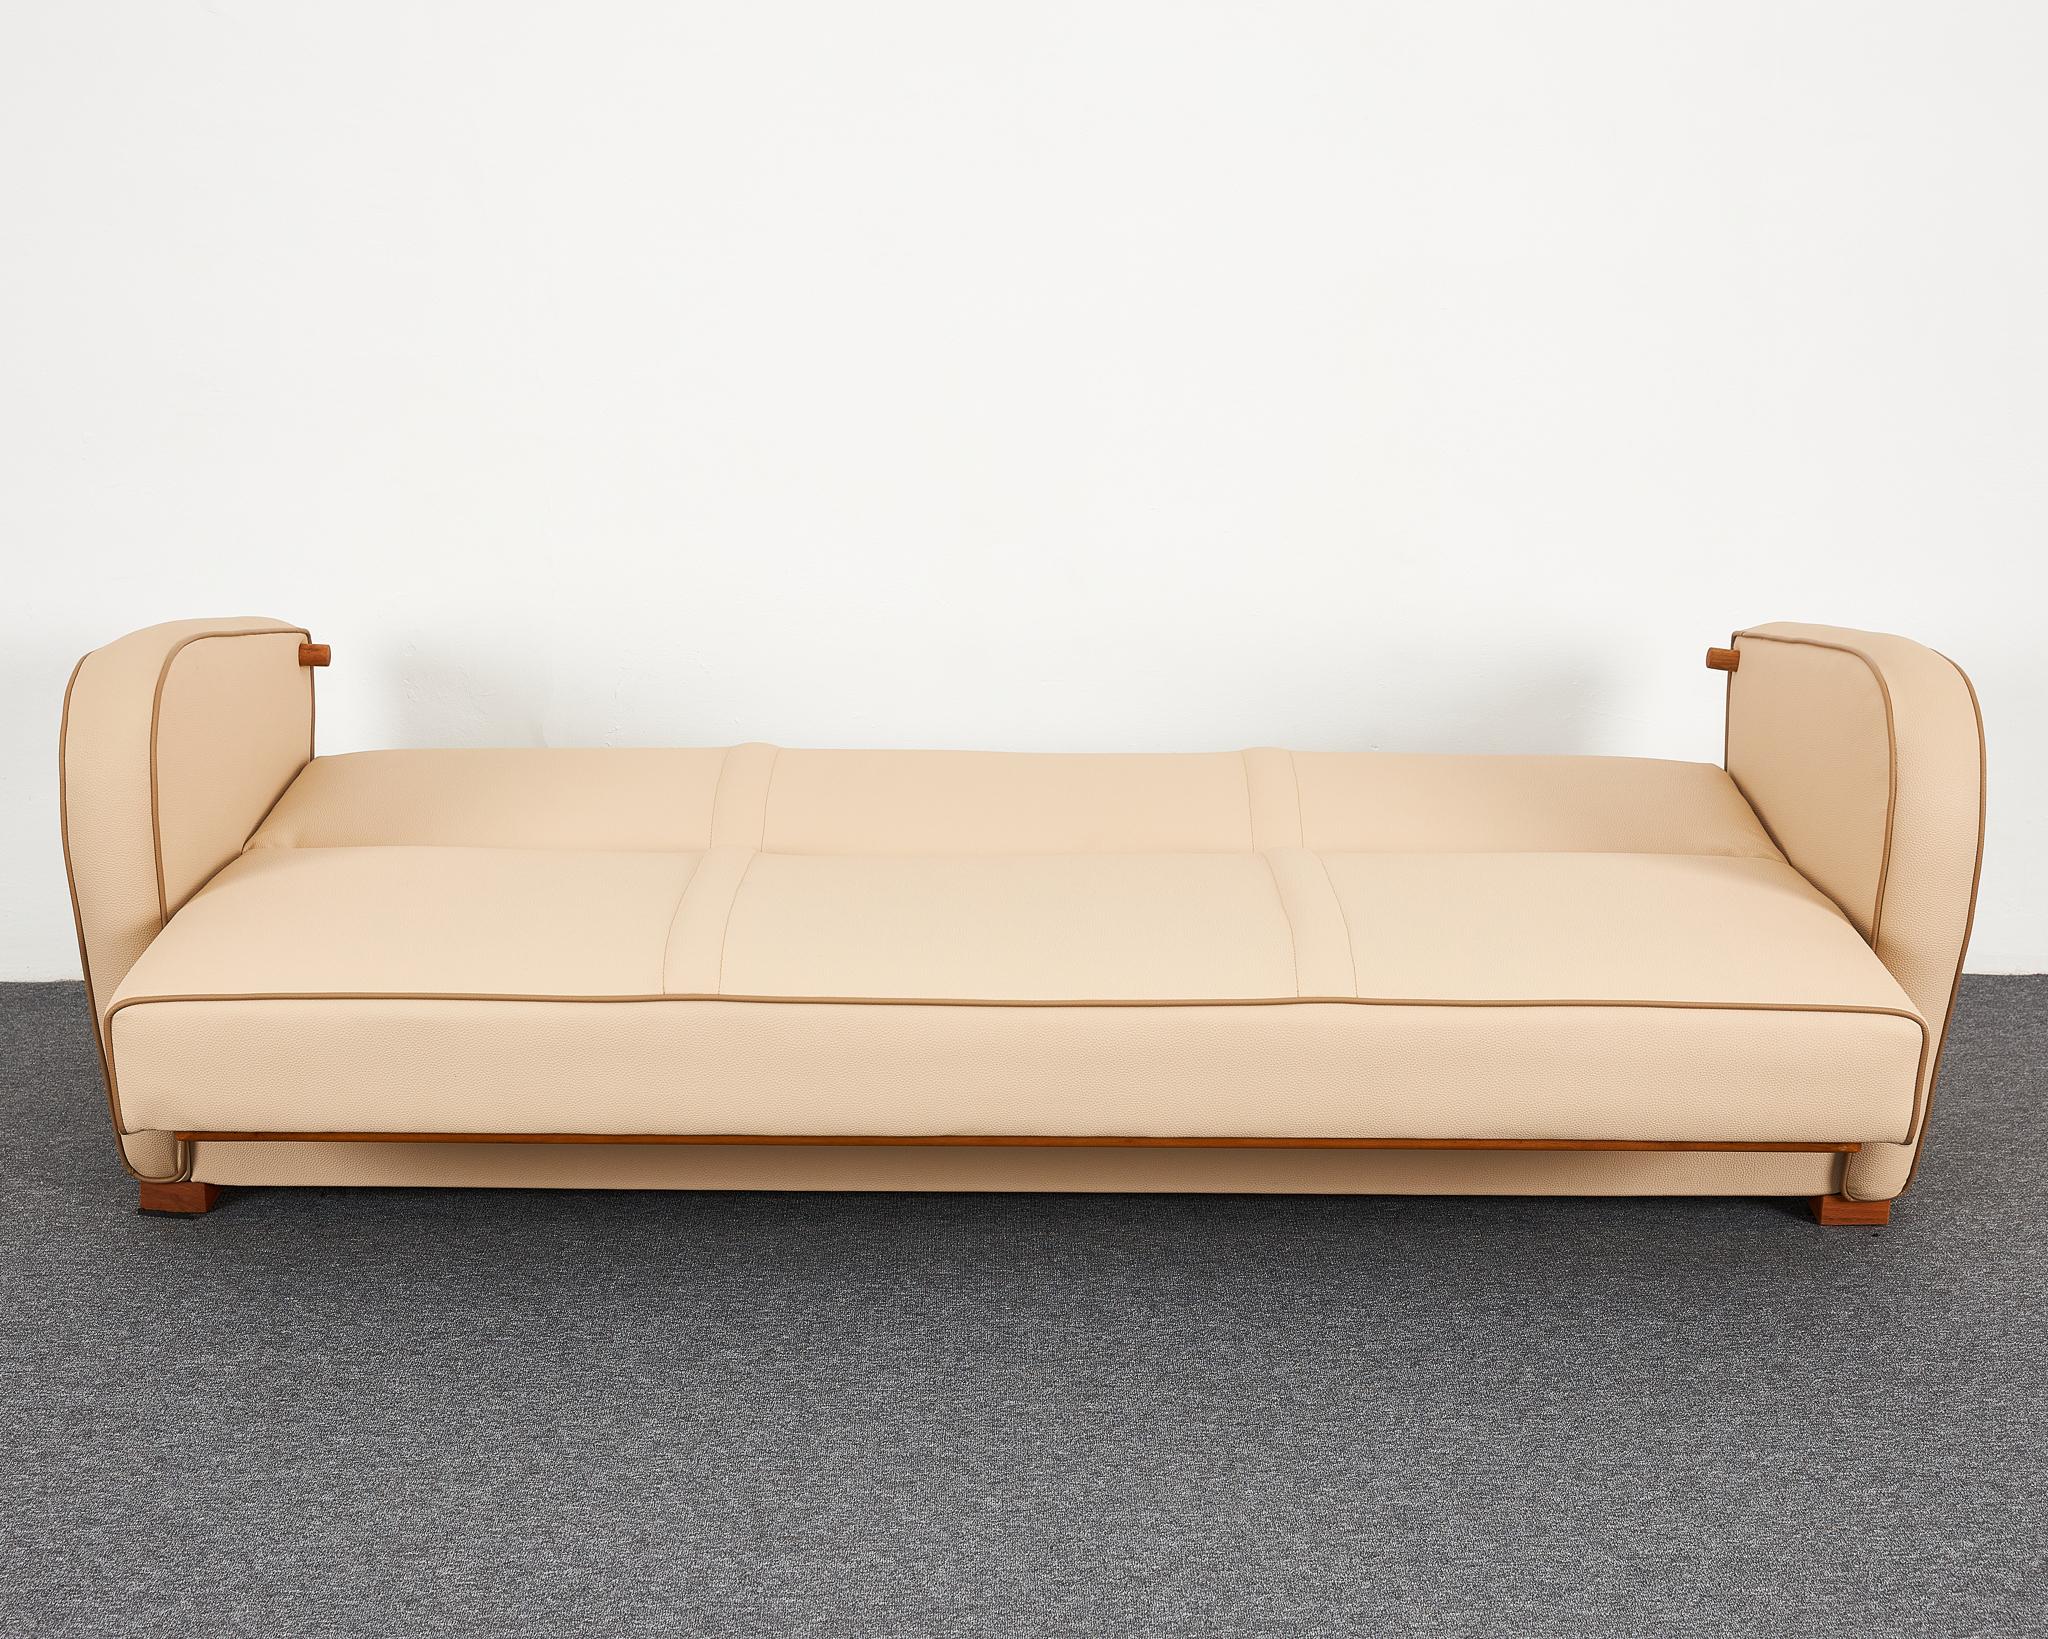 Jindrich Halabala Catalogue Piece, Beige Vegan Leather Sofa-Bed H-363 In Excellent Condition For Sale In Budapest, HU